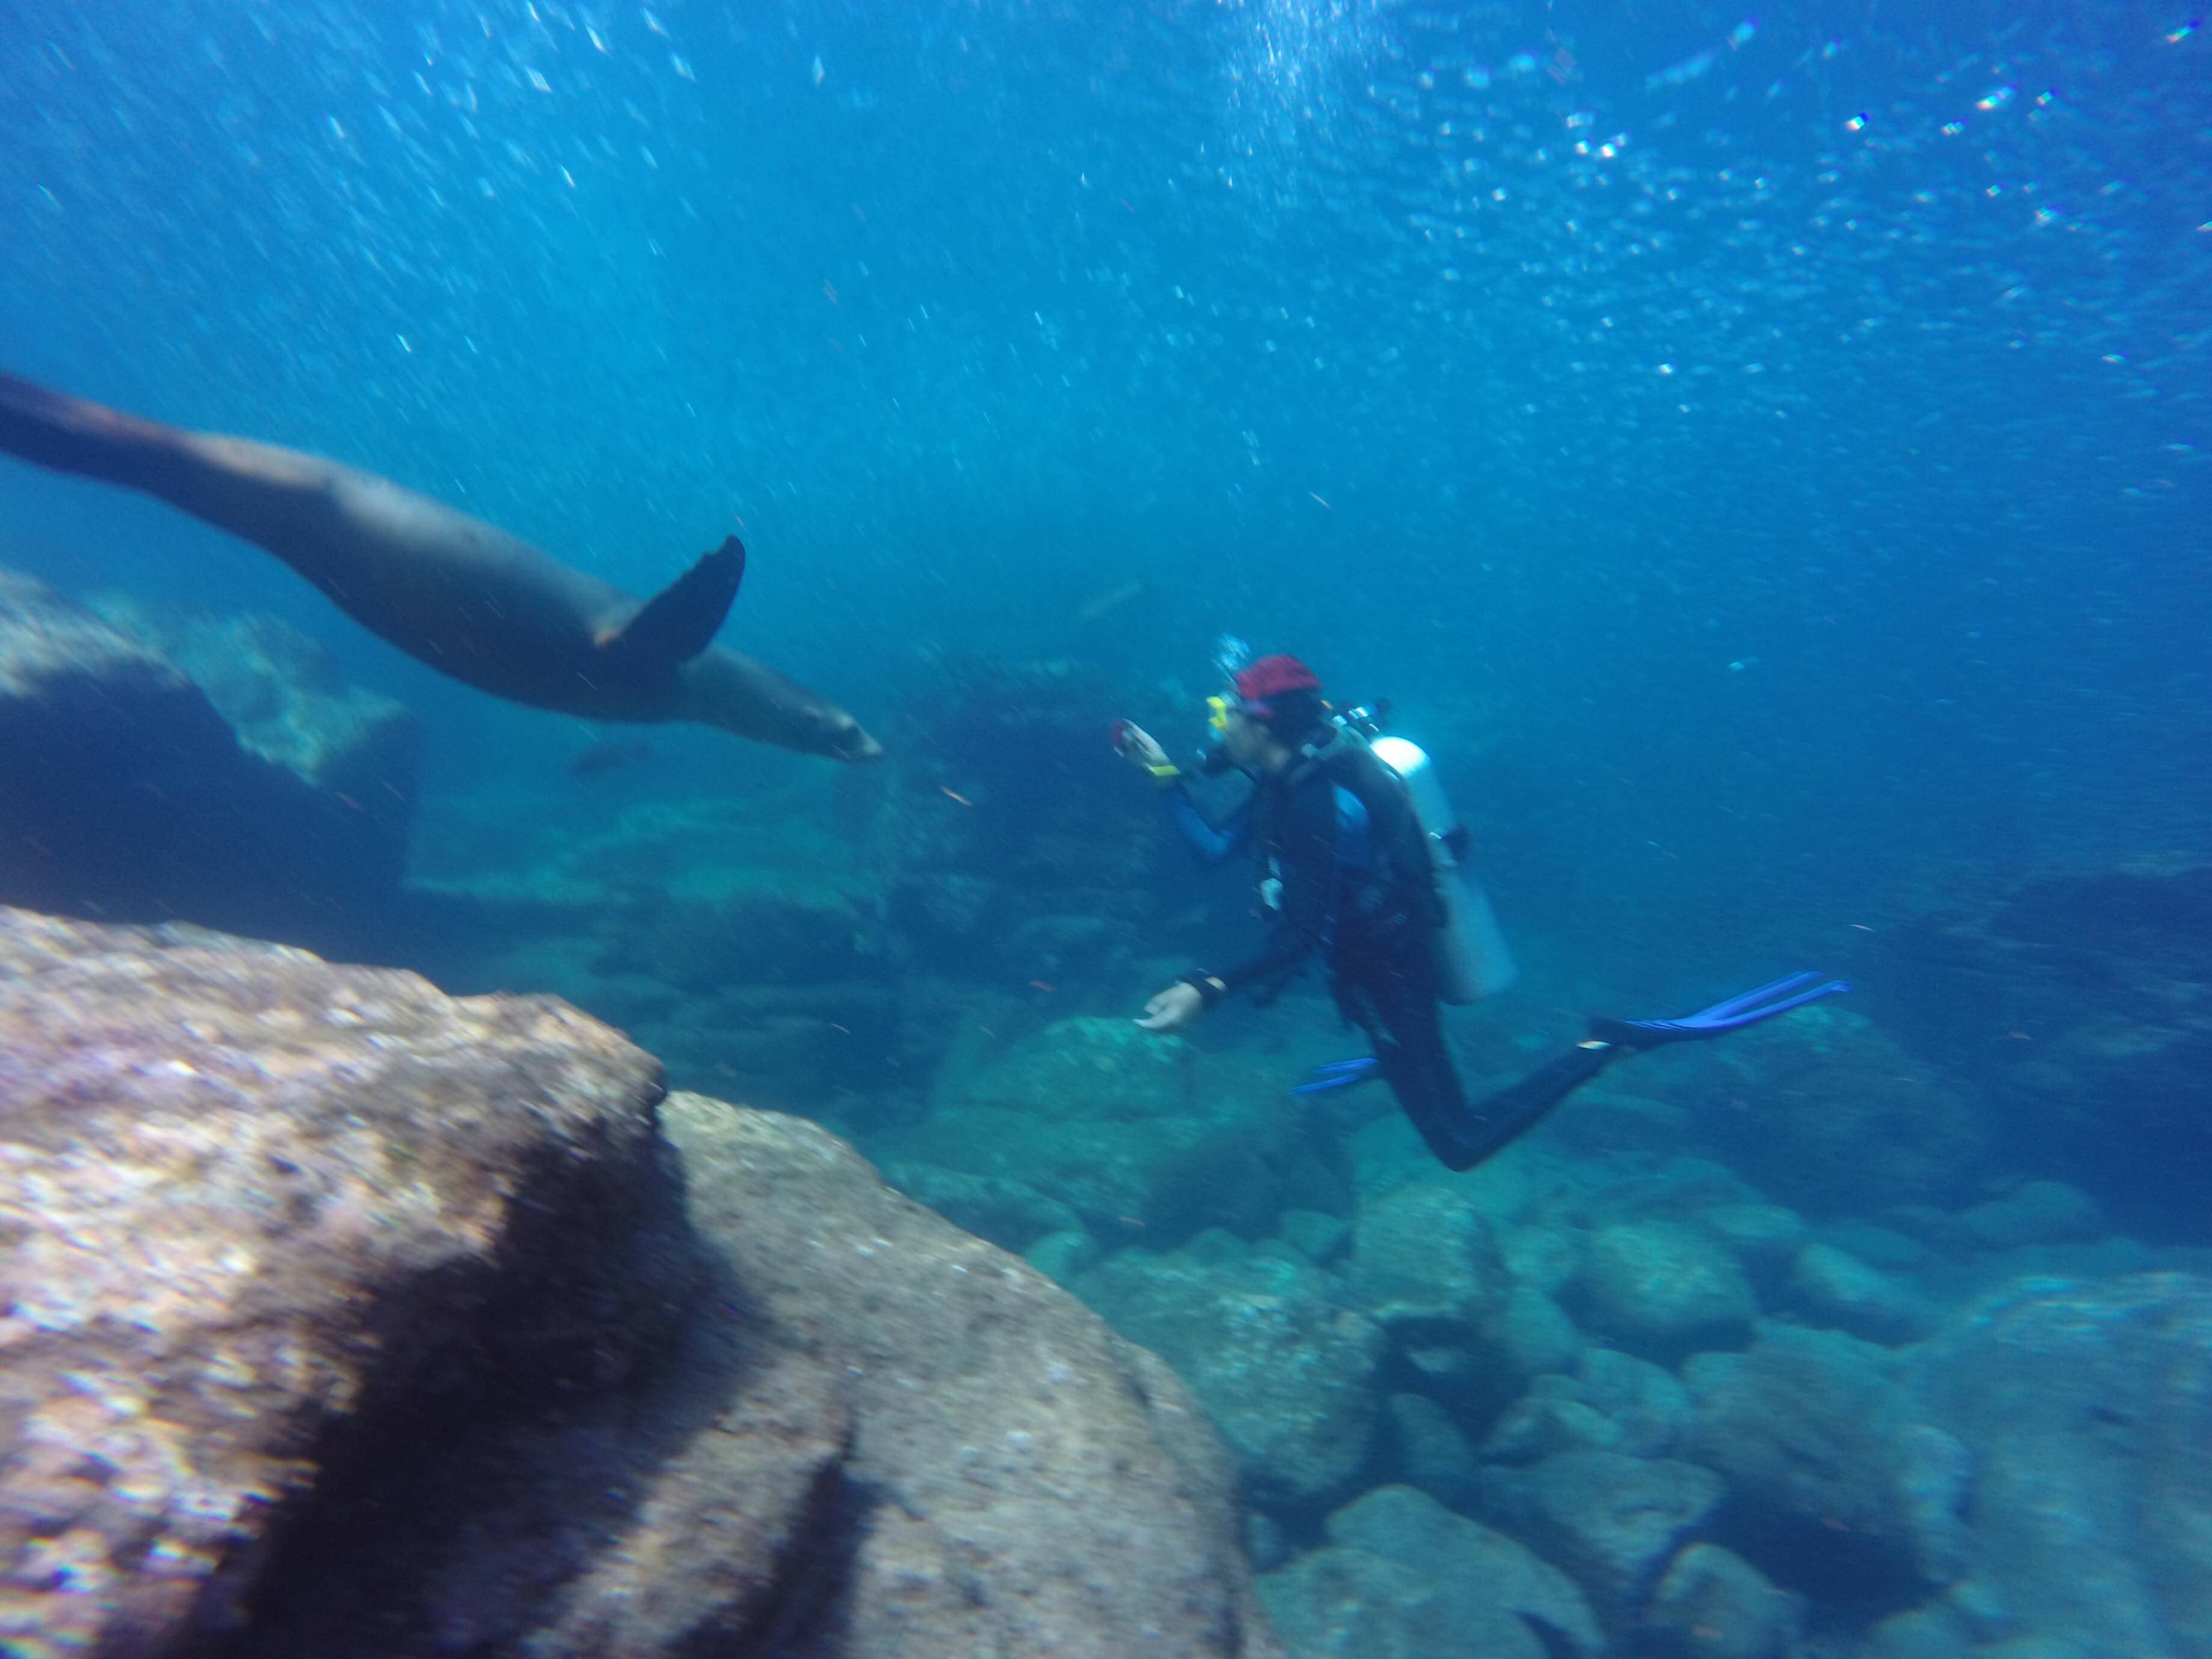 Carly Shabo diving with a sea lion.